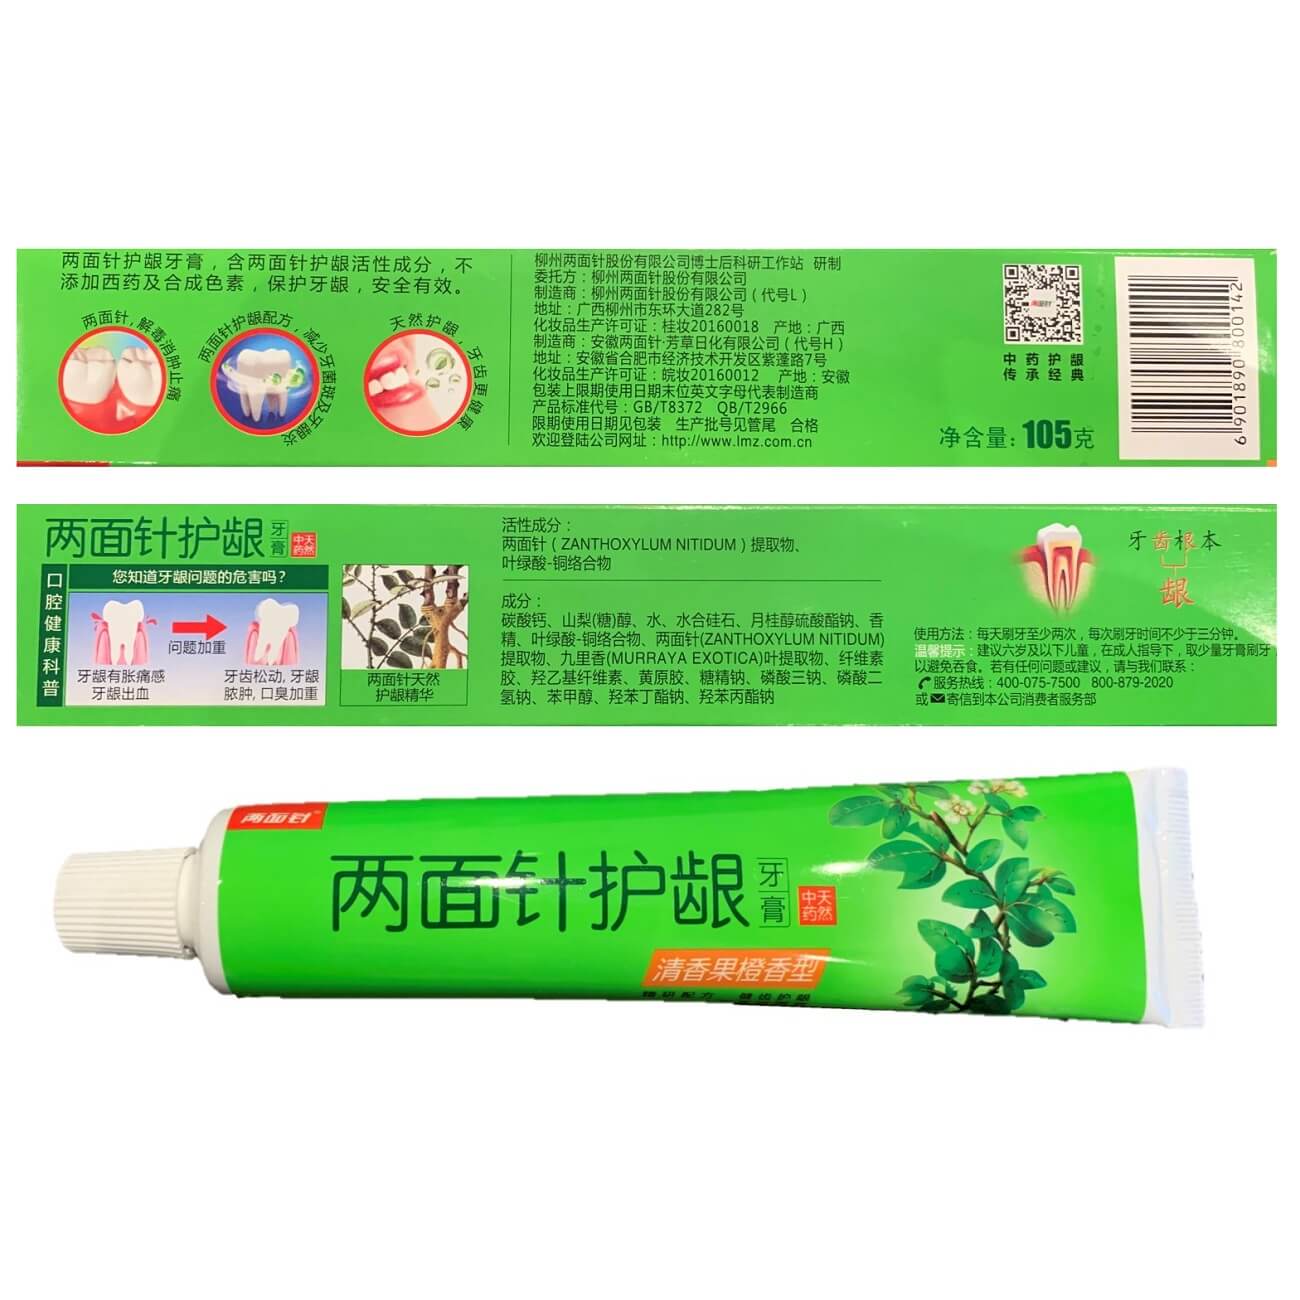 Herbal Toothpaste Variety, Liang Mian Zhen, Len Shuan Ling, Notoginseng - 6 Boxes - Buy at New Green Nutrition